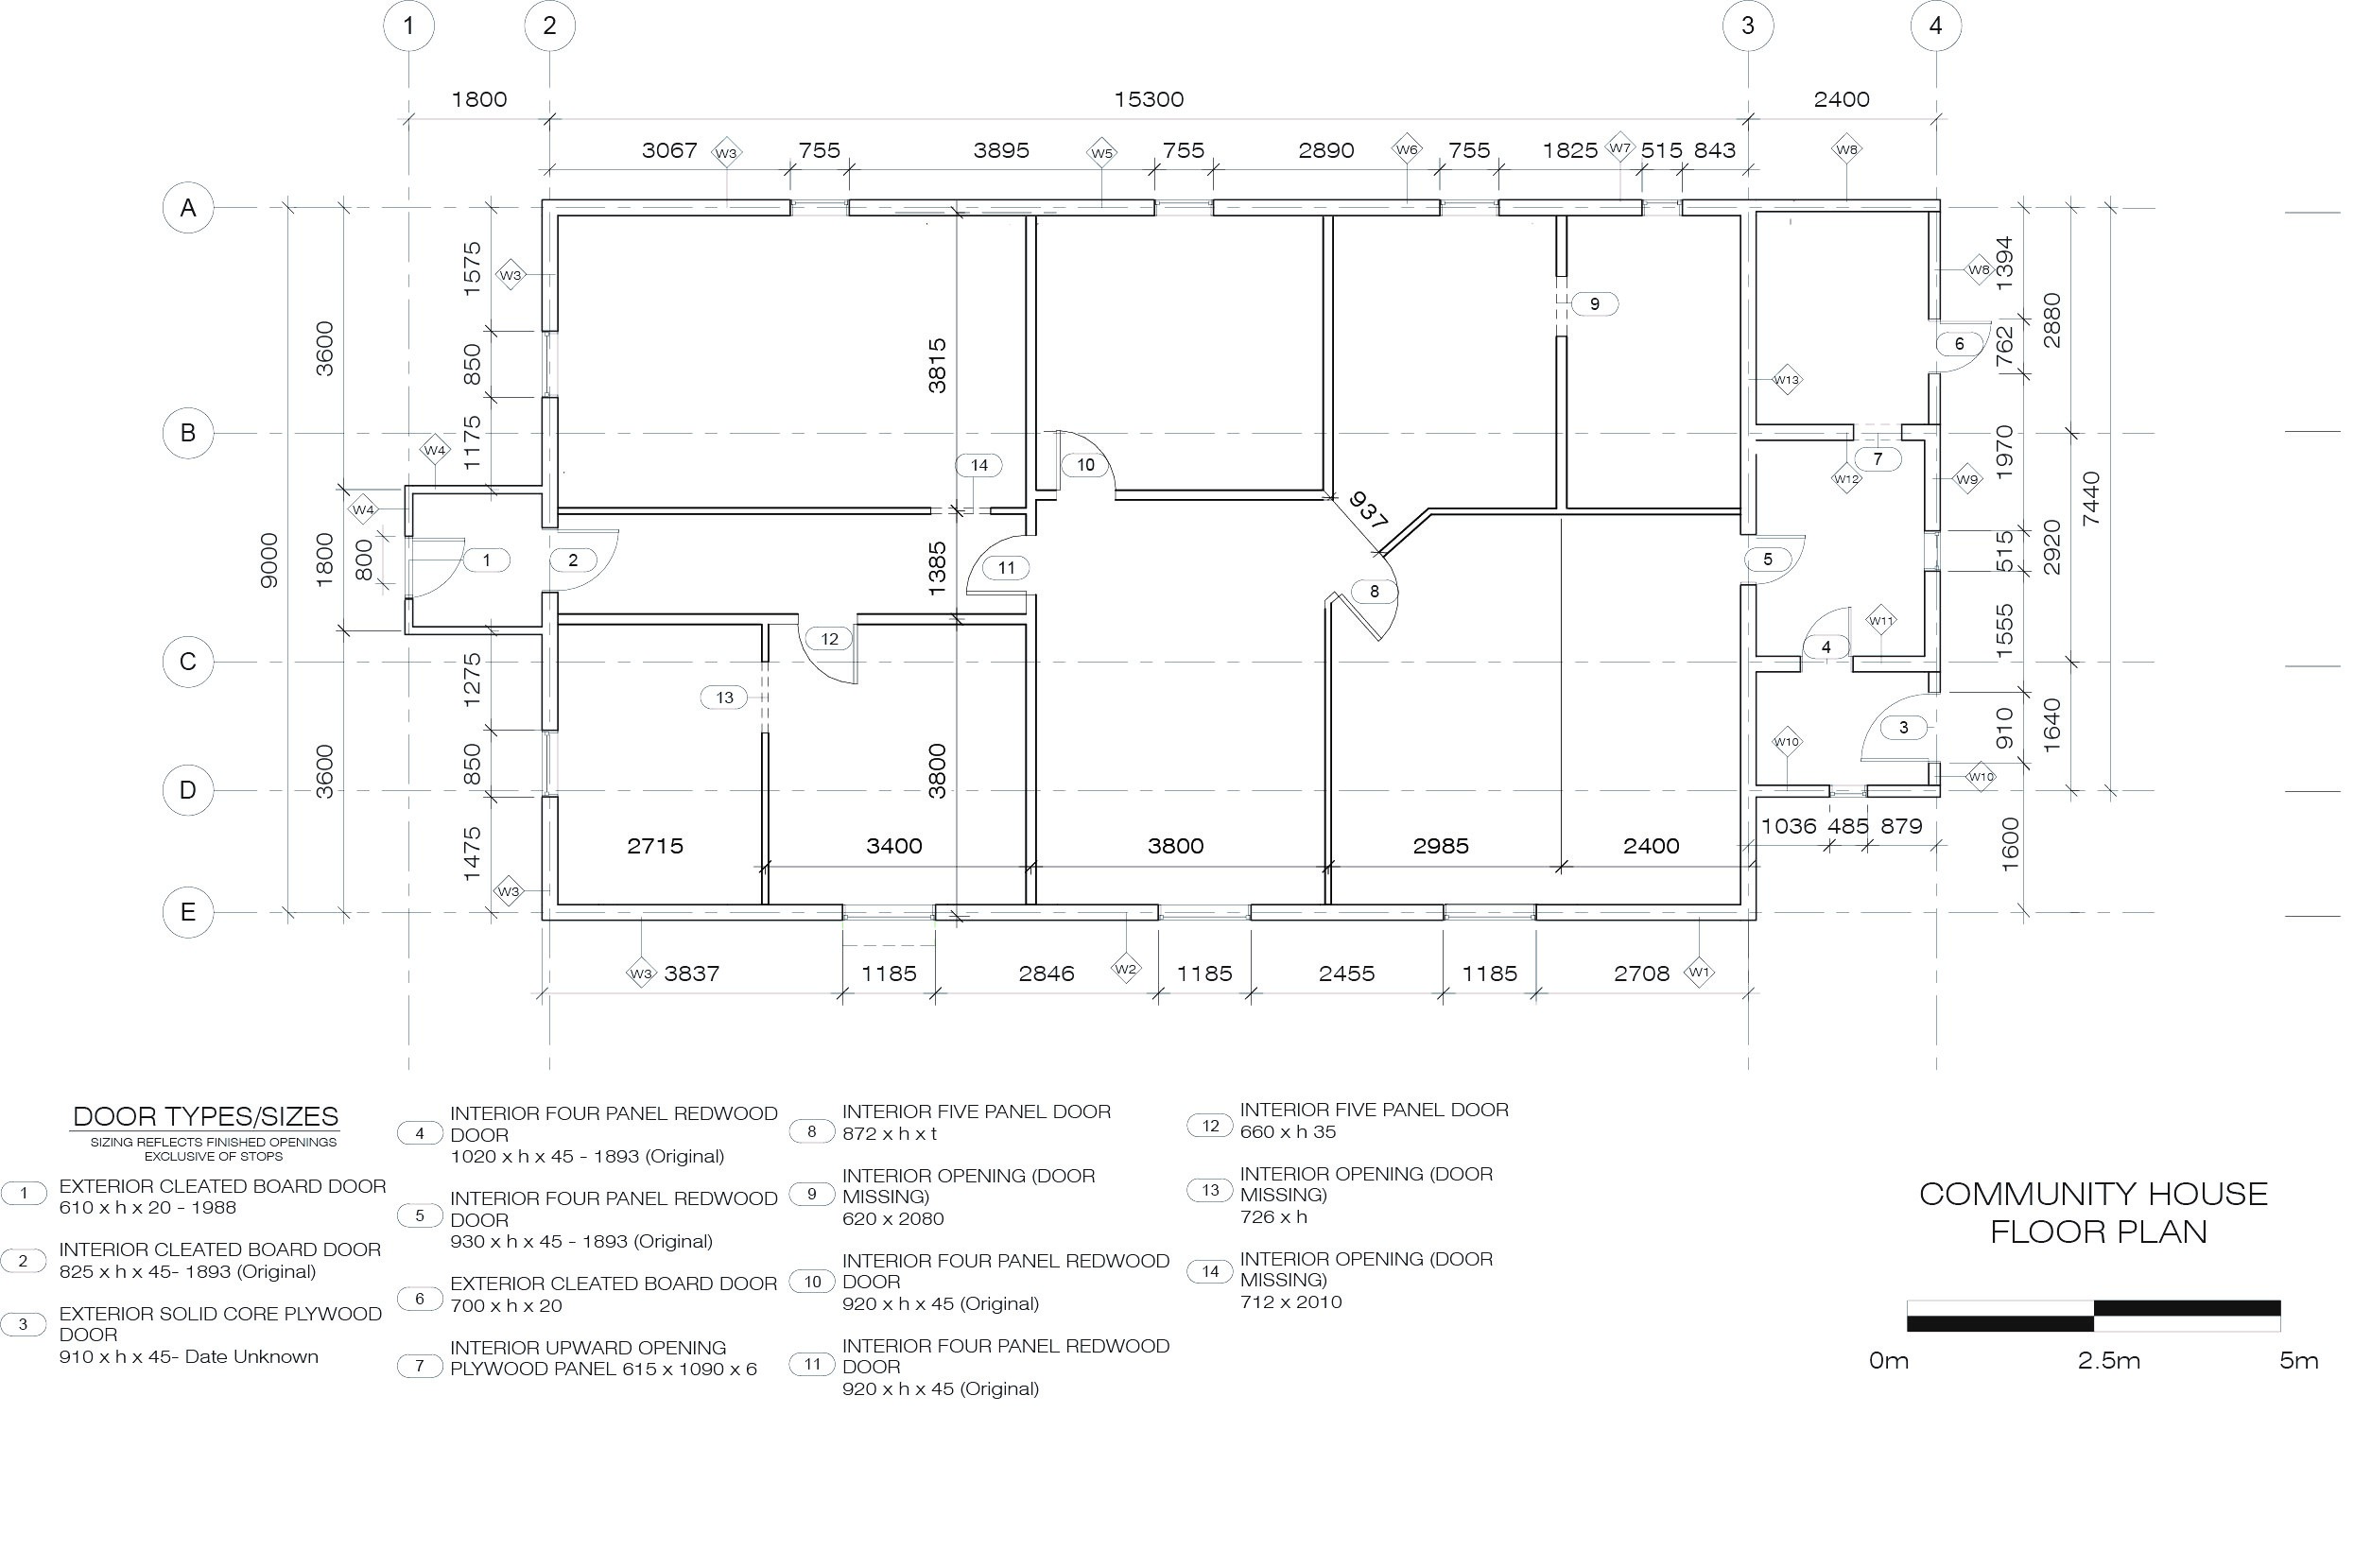 Architectural floor plans of the community house, created in Revit based off of the documentation done by the terrestrial laser scanning.